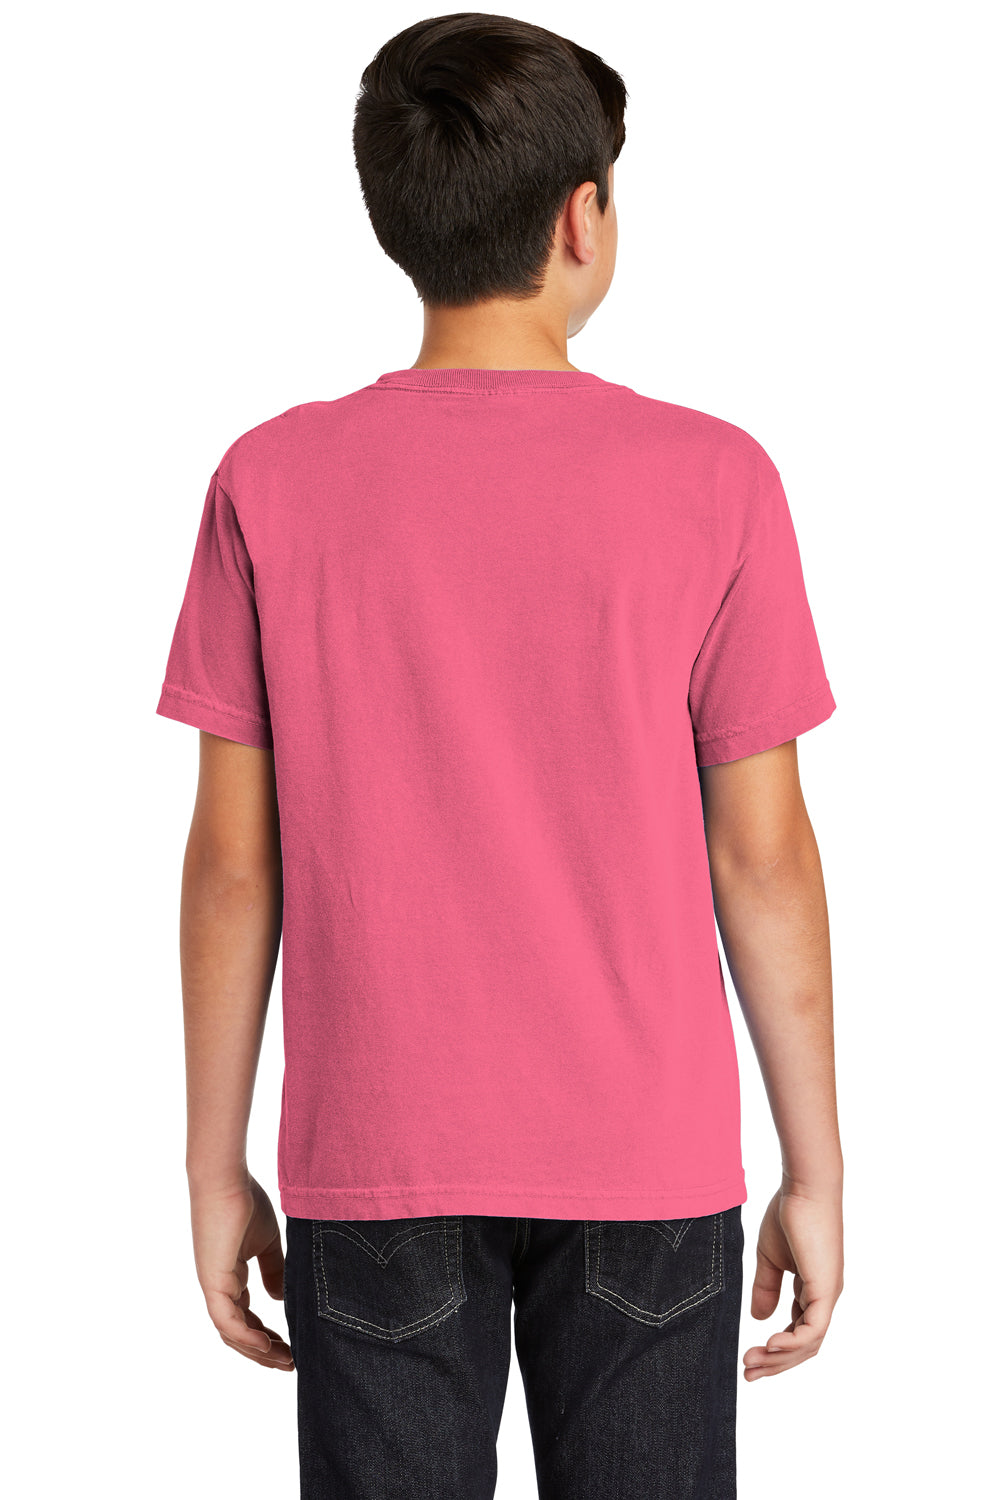 Comfort Colors C9018 Youth Short Sleeve Crewneck T-Shirt Crunchberry Pink Back